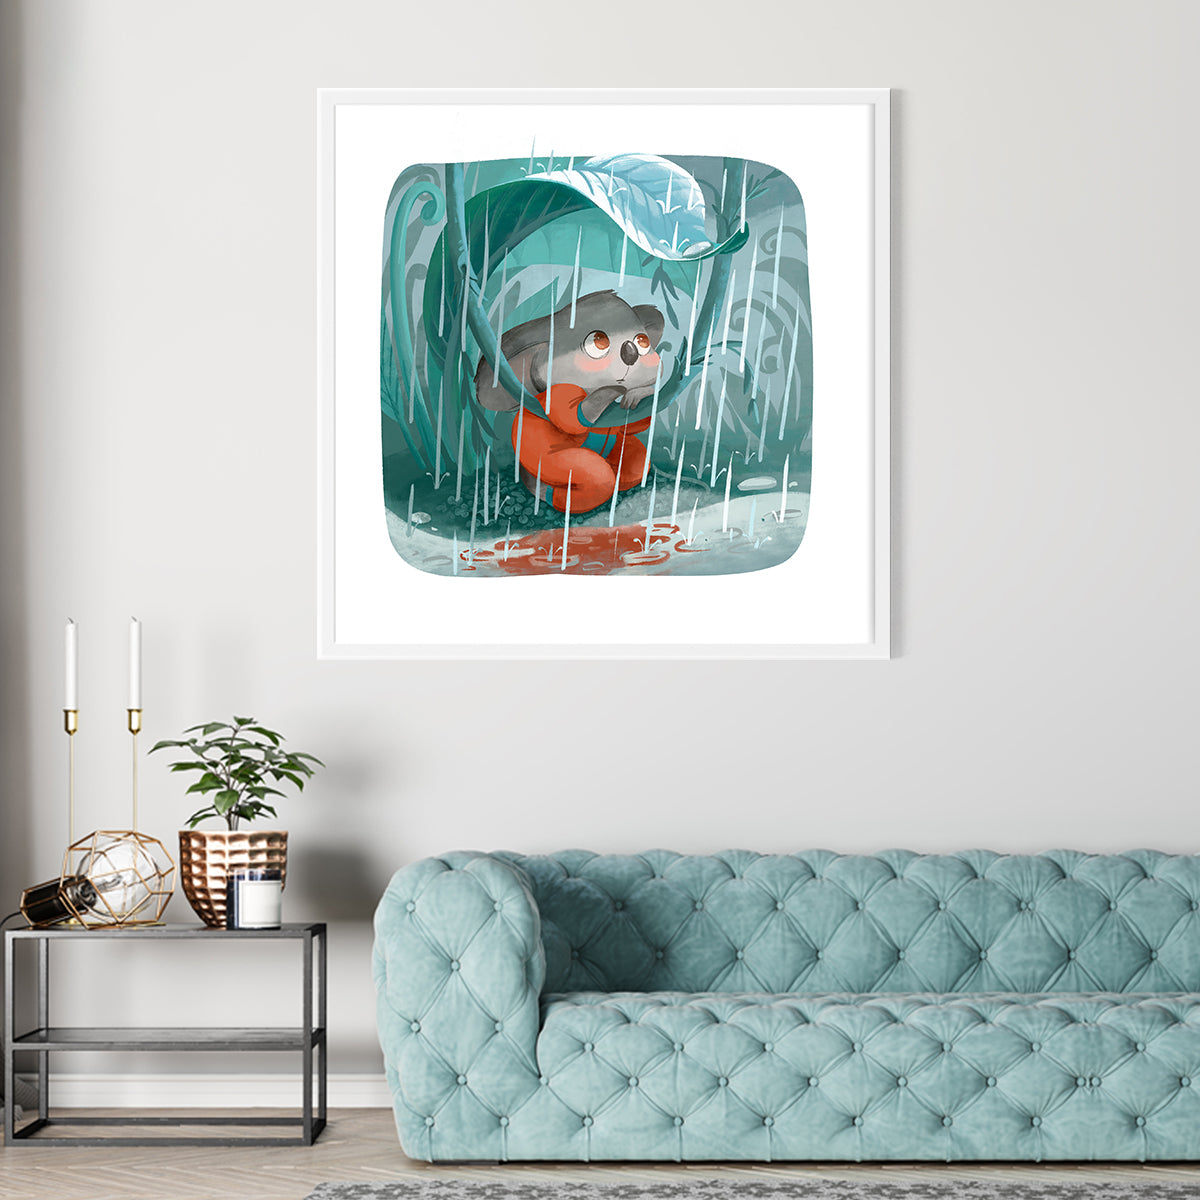 Koala Hiding From Rain Wall Posters-Square Posters NOT FRAMED-CetArt-8″x8″ inches-CetArt